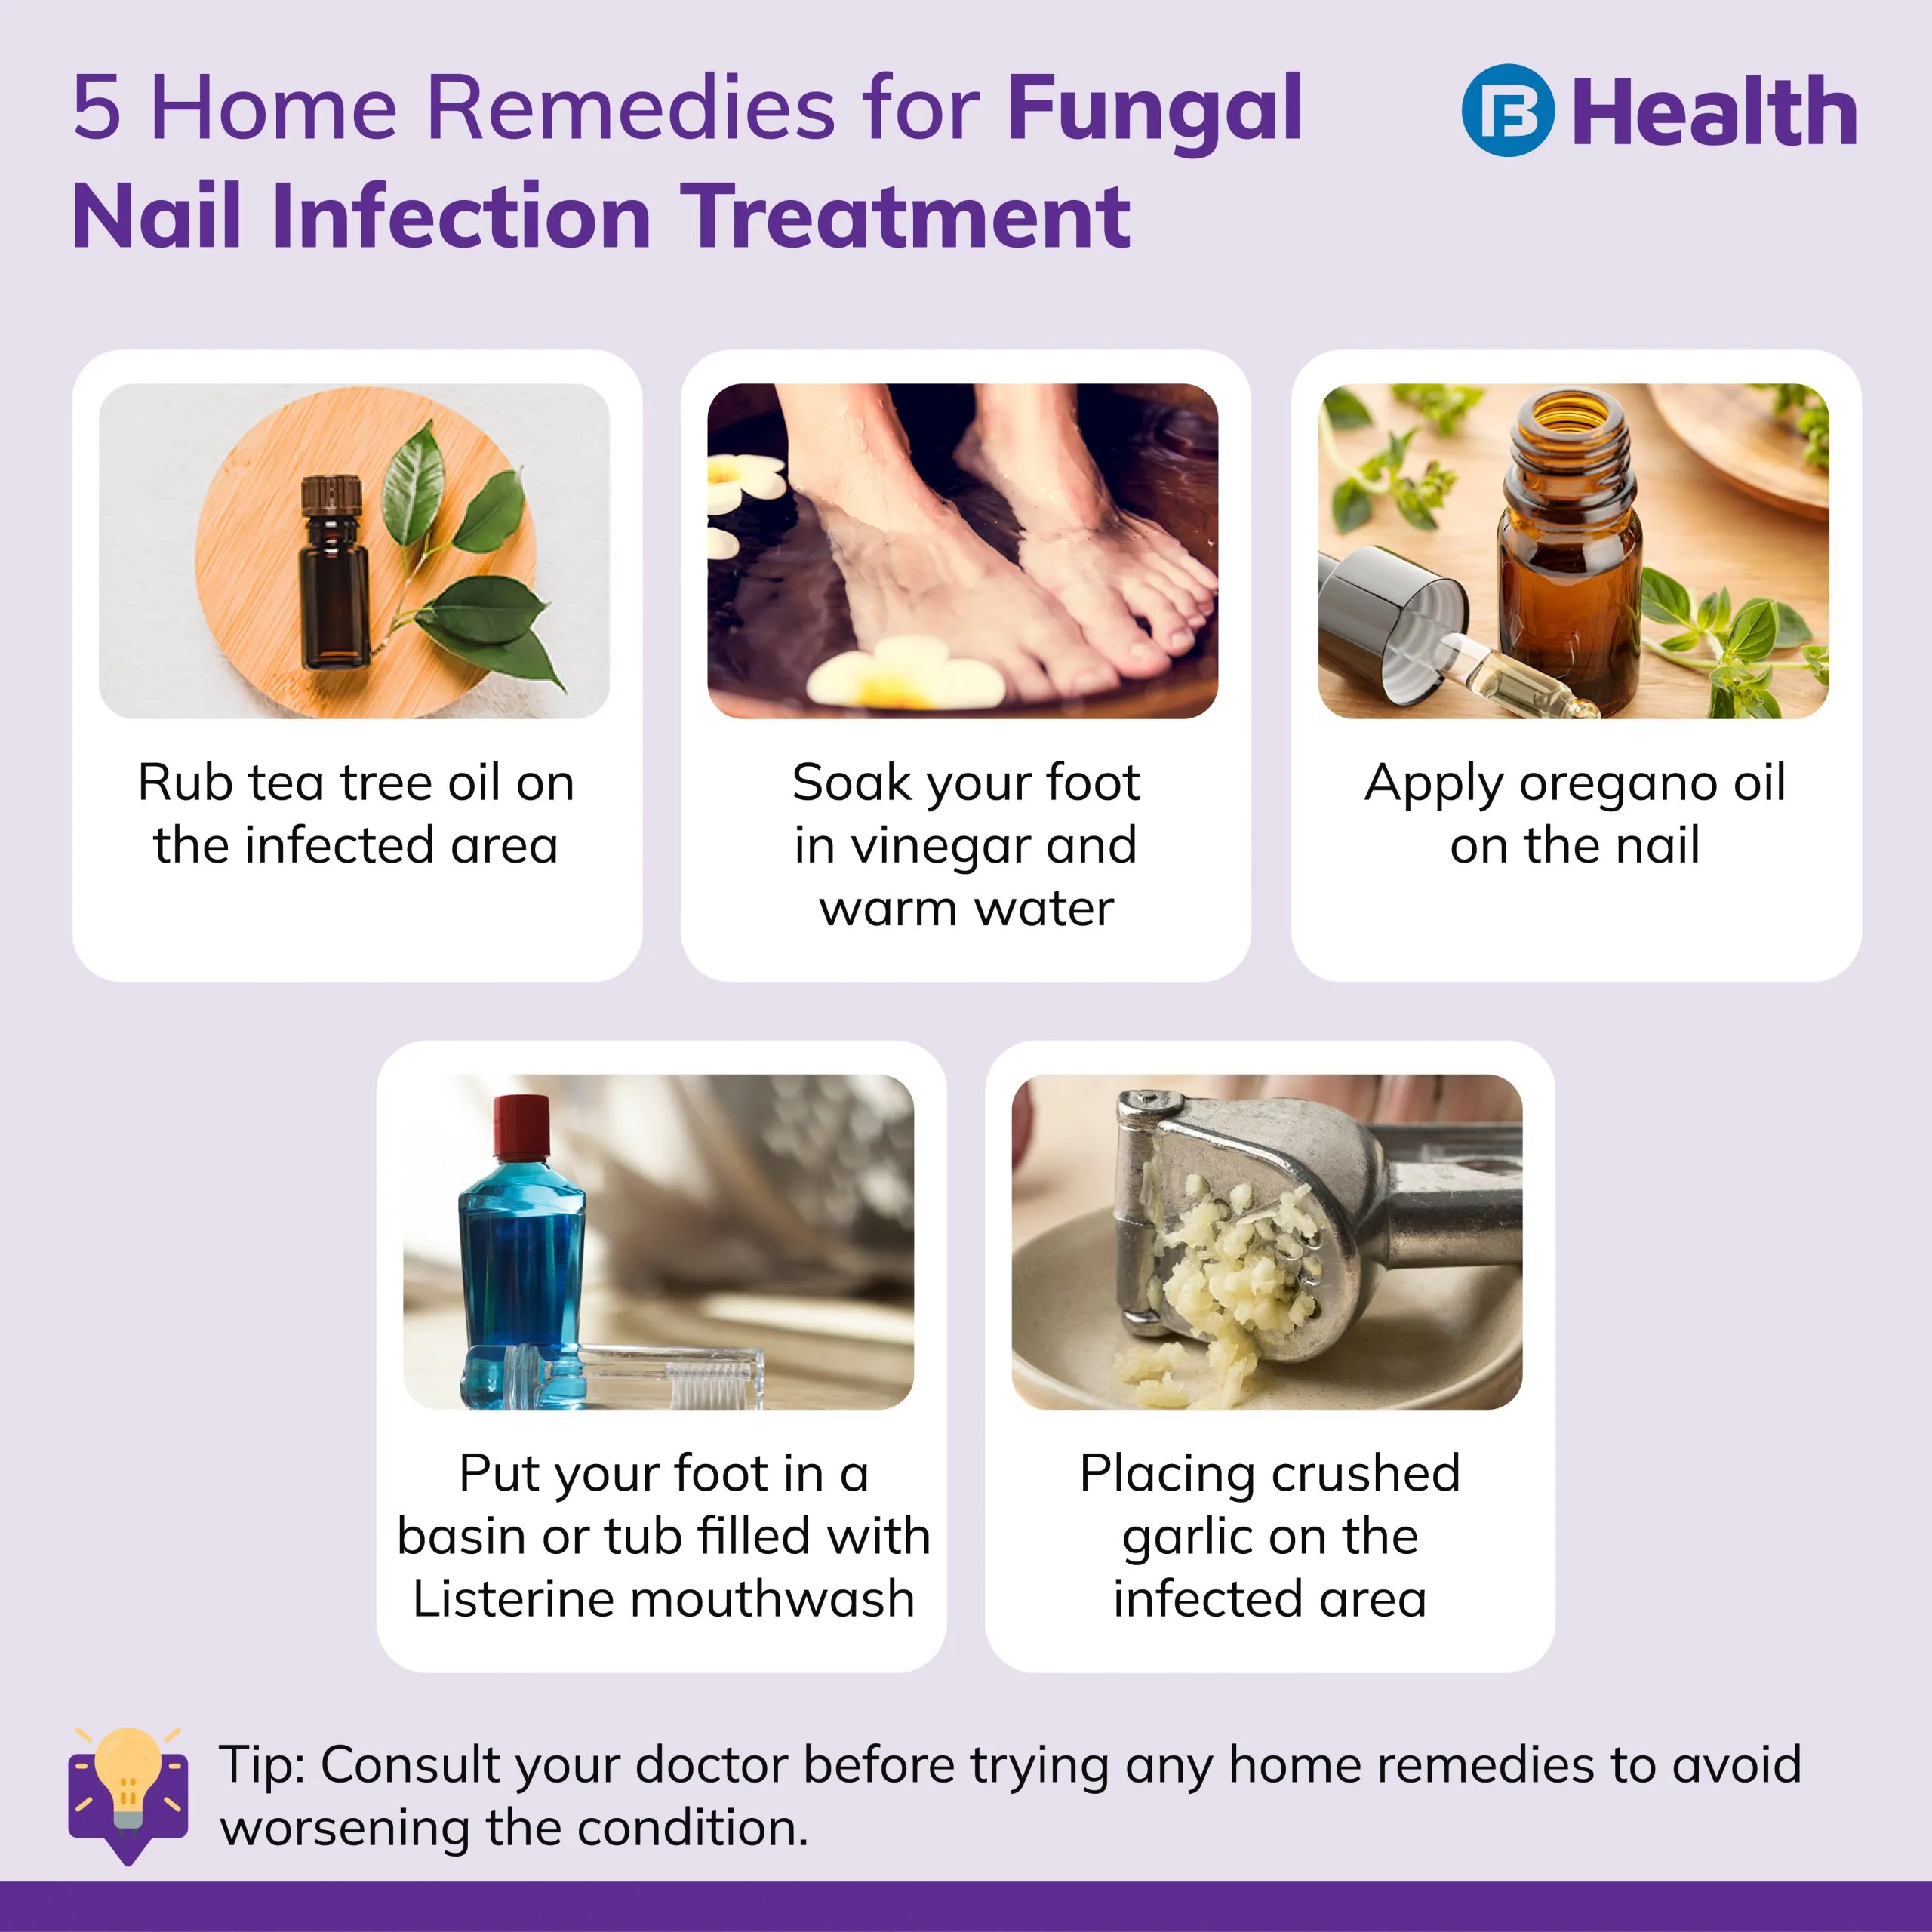 Home remedies for Fungal Nail Infection